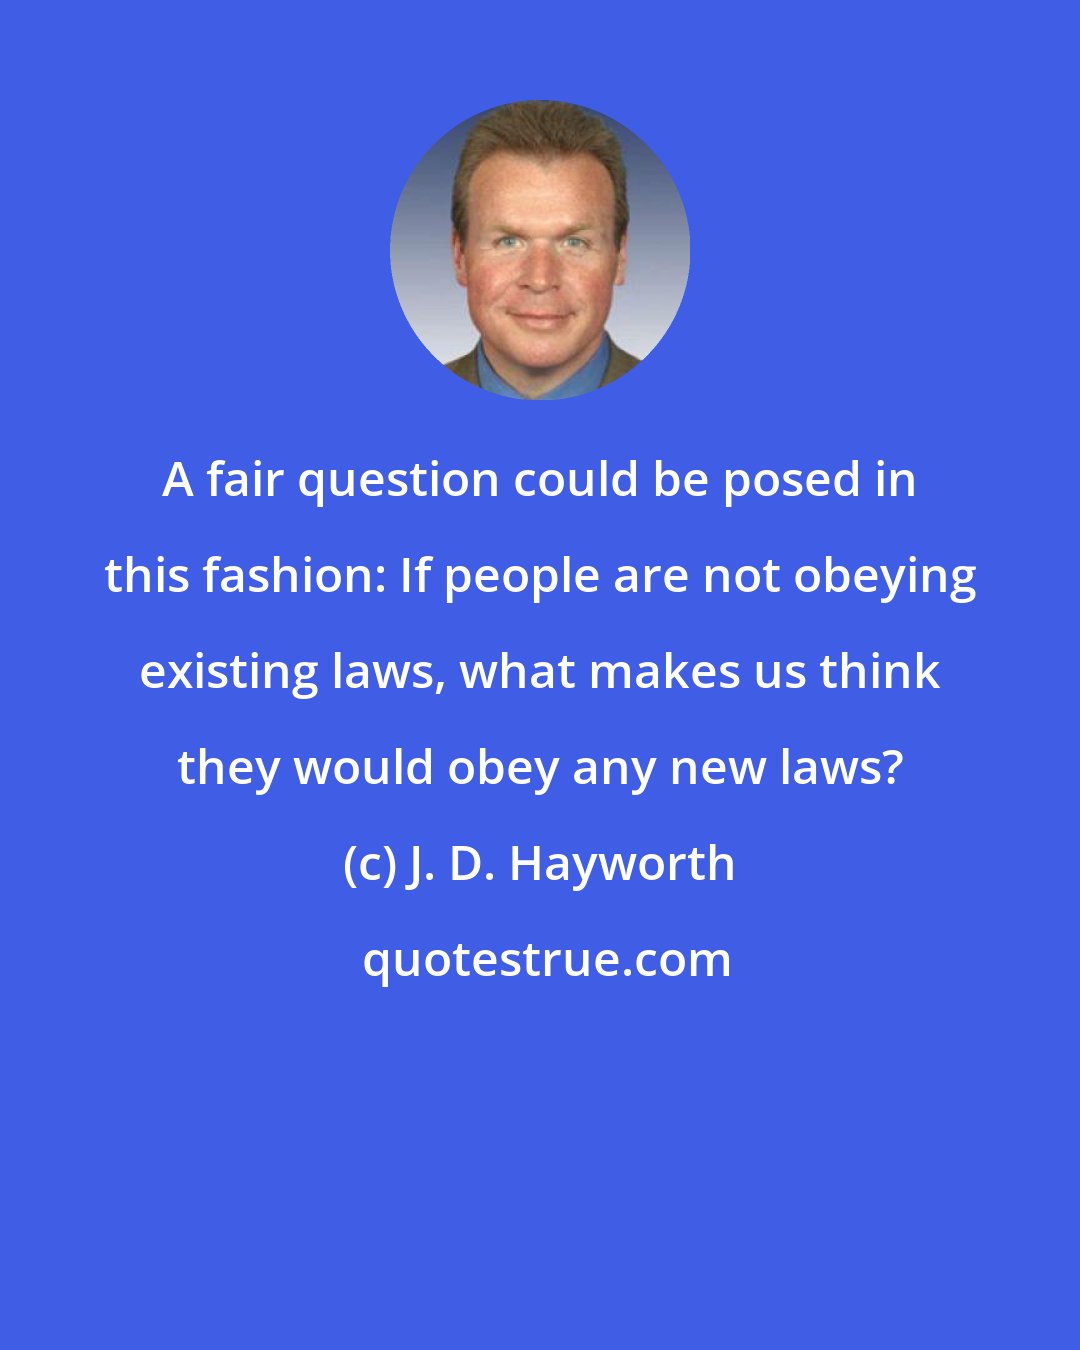 J. D. Hayworth: A fair question could be posed in this fashion: If people are not obeying existing laws, what makes us think they would obey any new laws?